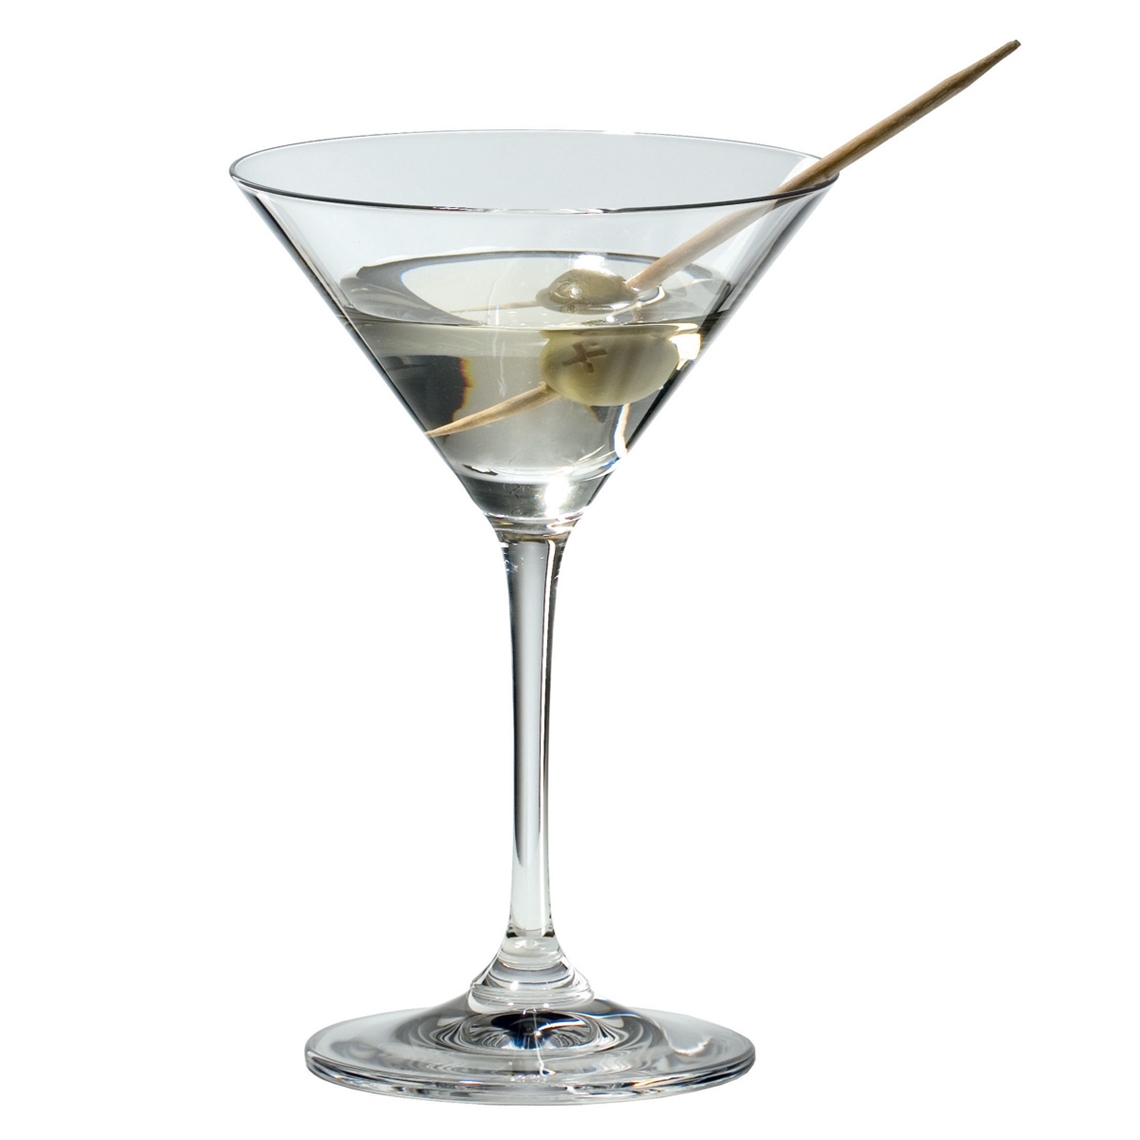 View more chablis wine glasses from our Martini Glasses range